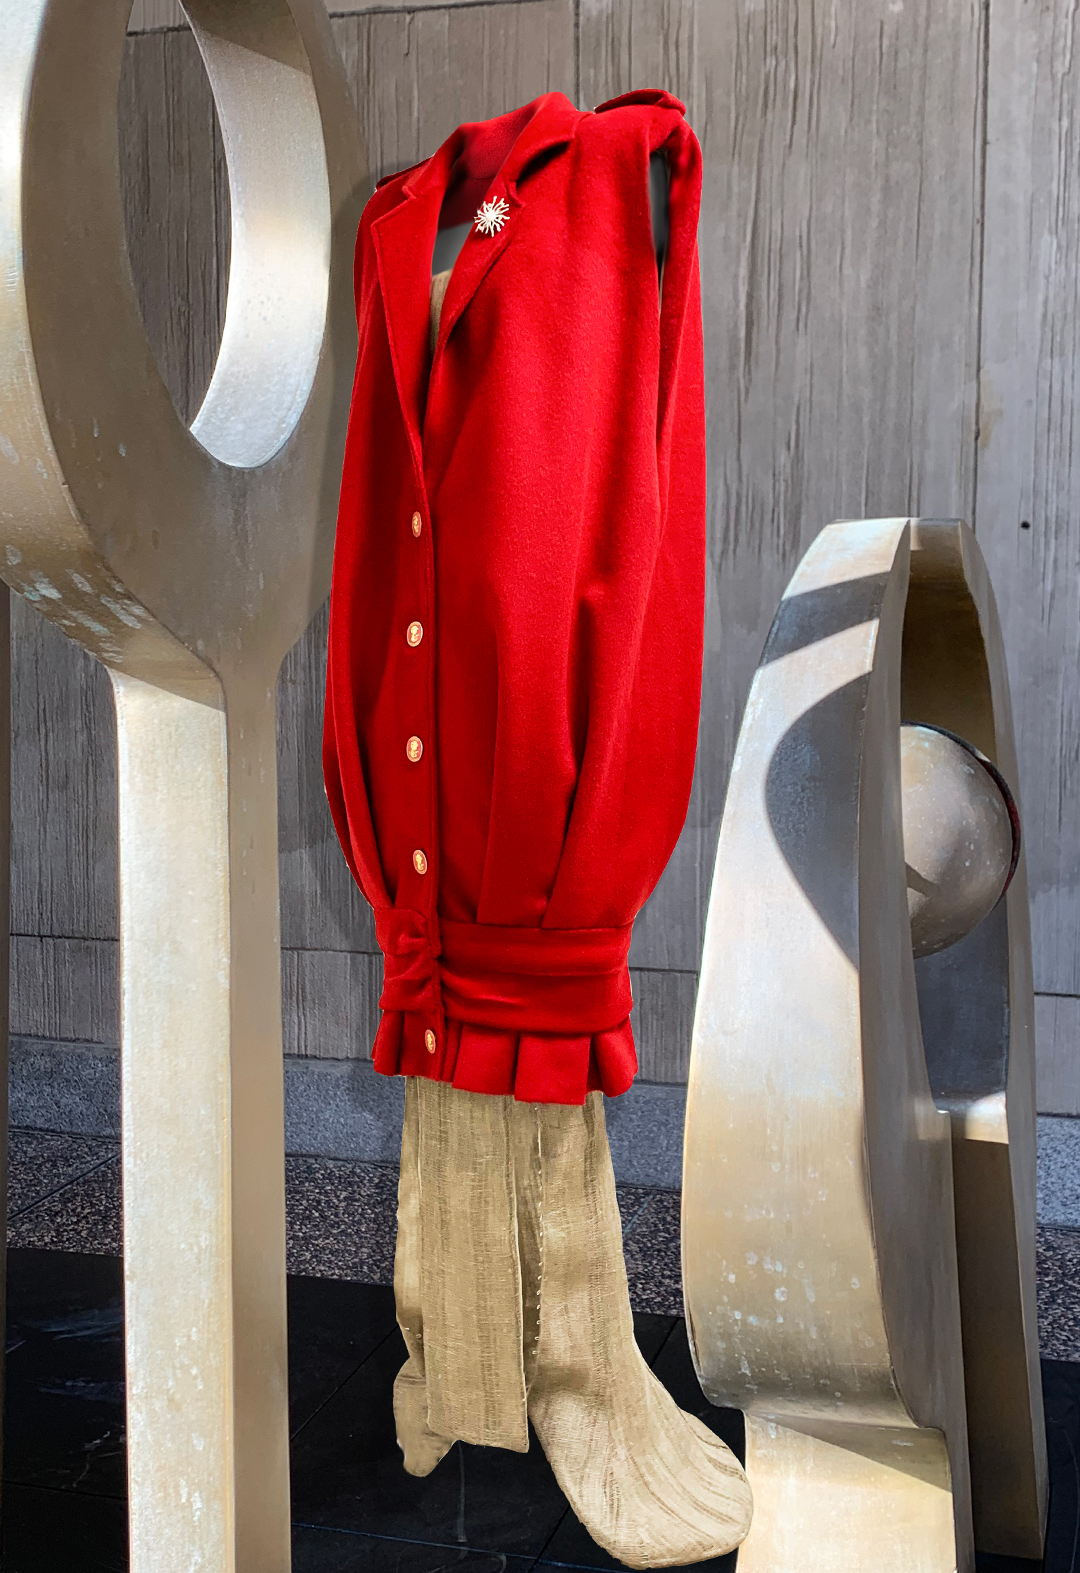 The top is a long red vest. There is a linen dress underneath. The clothes are presented against a background of a group of metal sculptures.